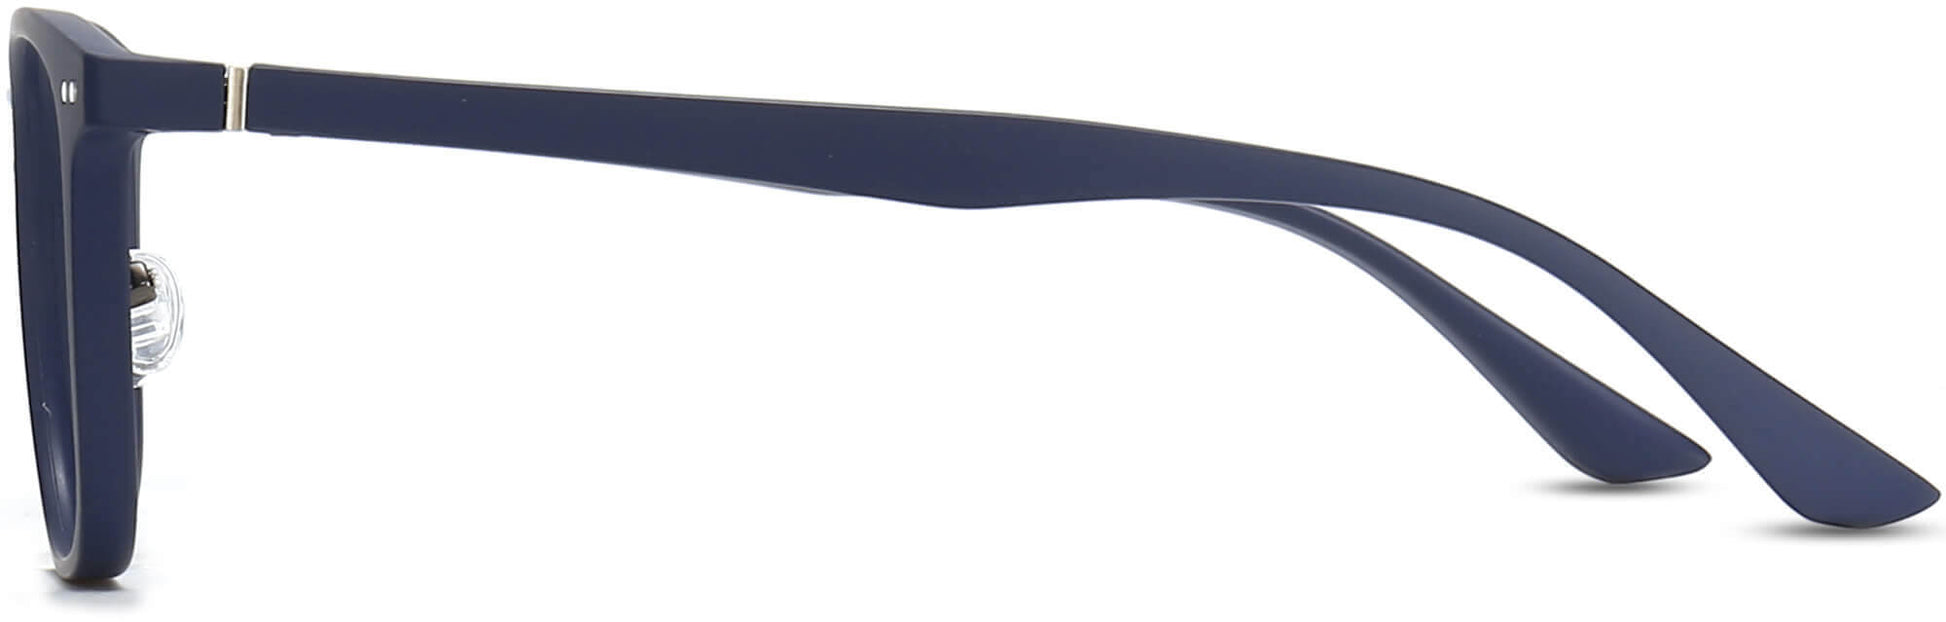 Chance Square Blue Eyeglasses from ANRRI, side view